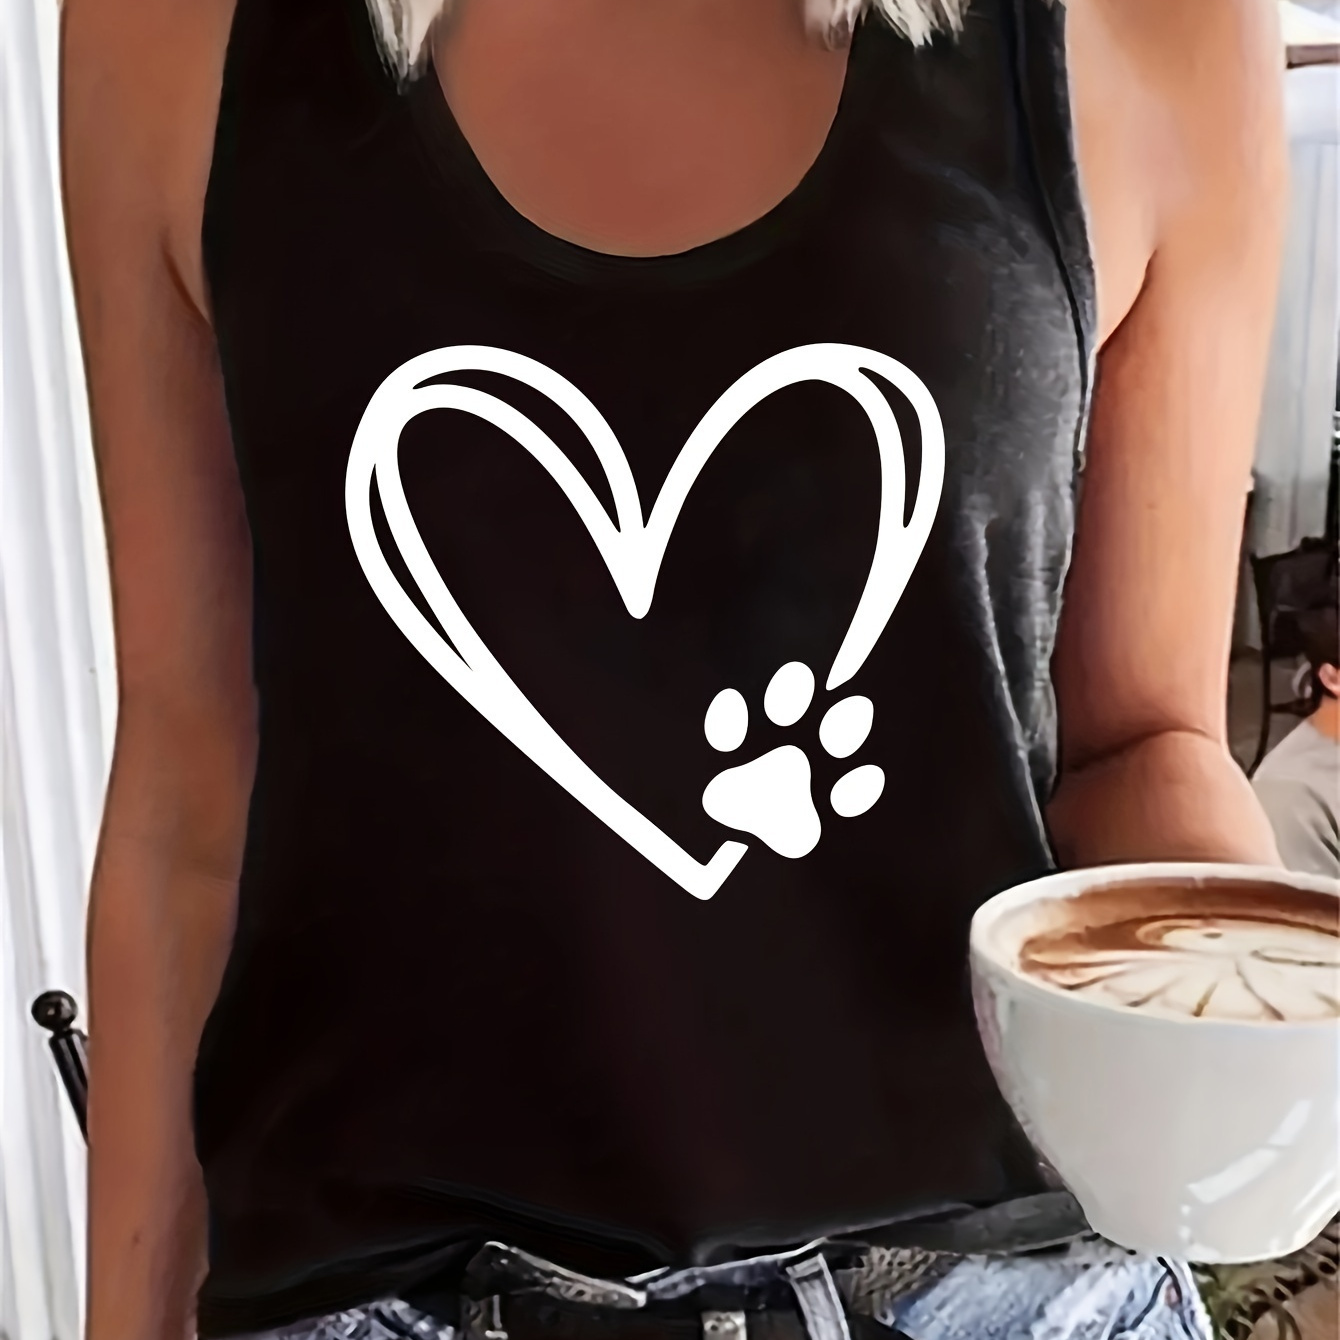 

Heart & Paw Print Tank Top, Sleeveless Casual Top For Summer & Spring, Women's Clothing